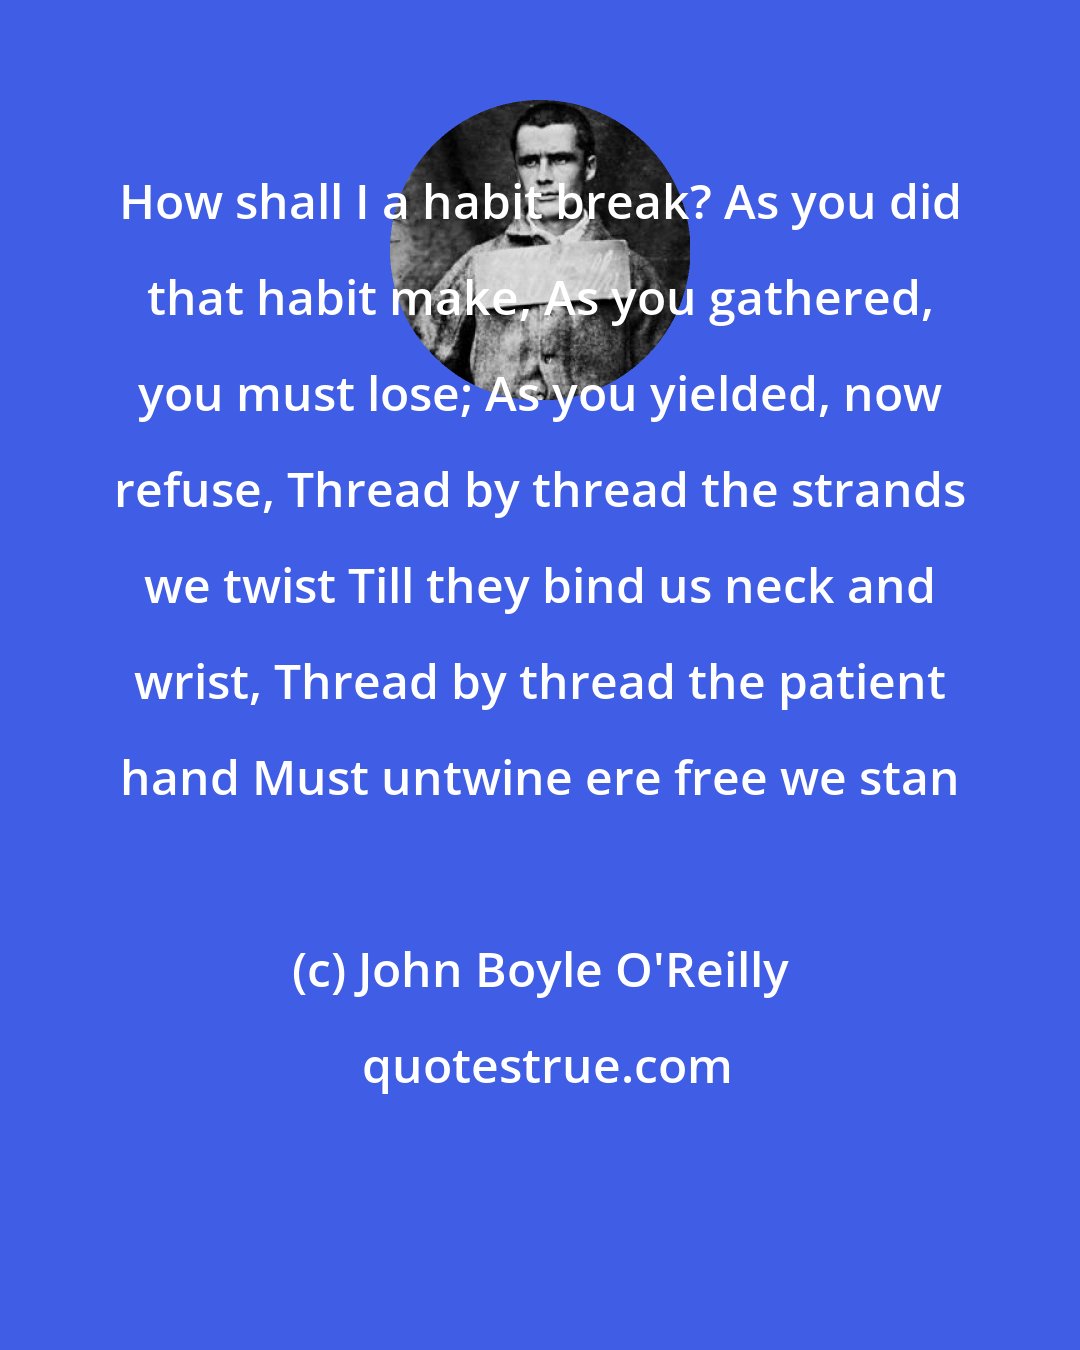 John Boyle O'Reilly: How shall I a habit break? As you did that habit make, As you gathered, you must lose; As you yielded, now refuse, Thread by thread the strands we twist Till they bind us neck and wrist, Thread by thread the patient hand Must untwine ere free we stan